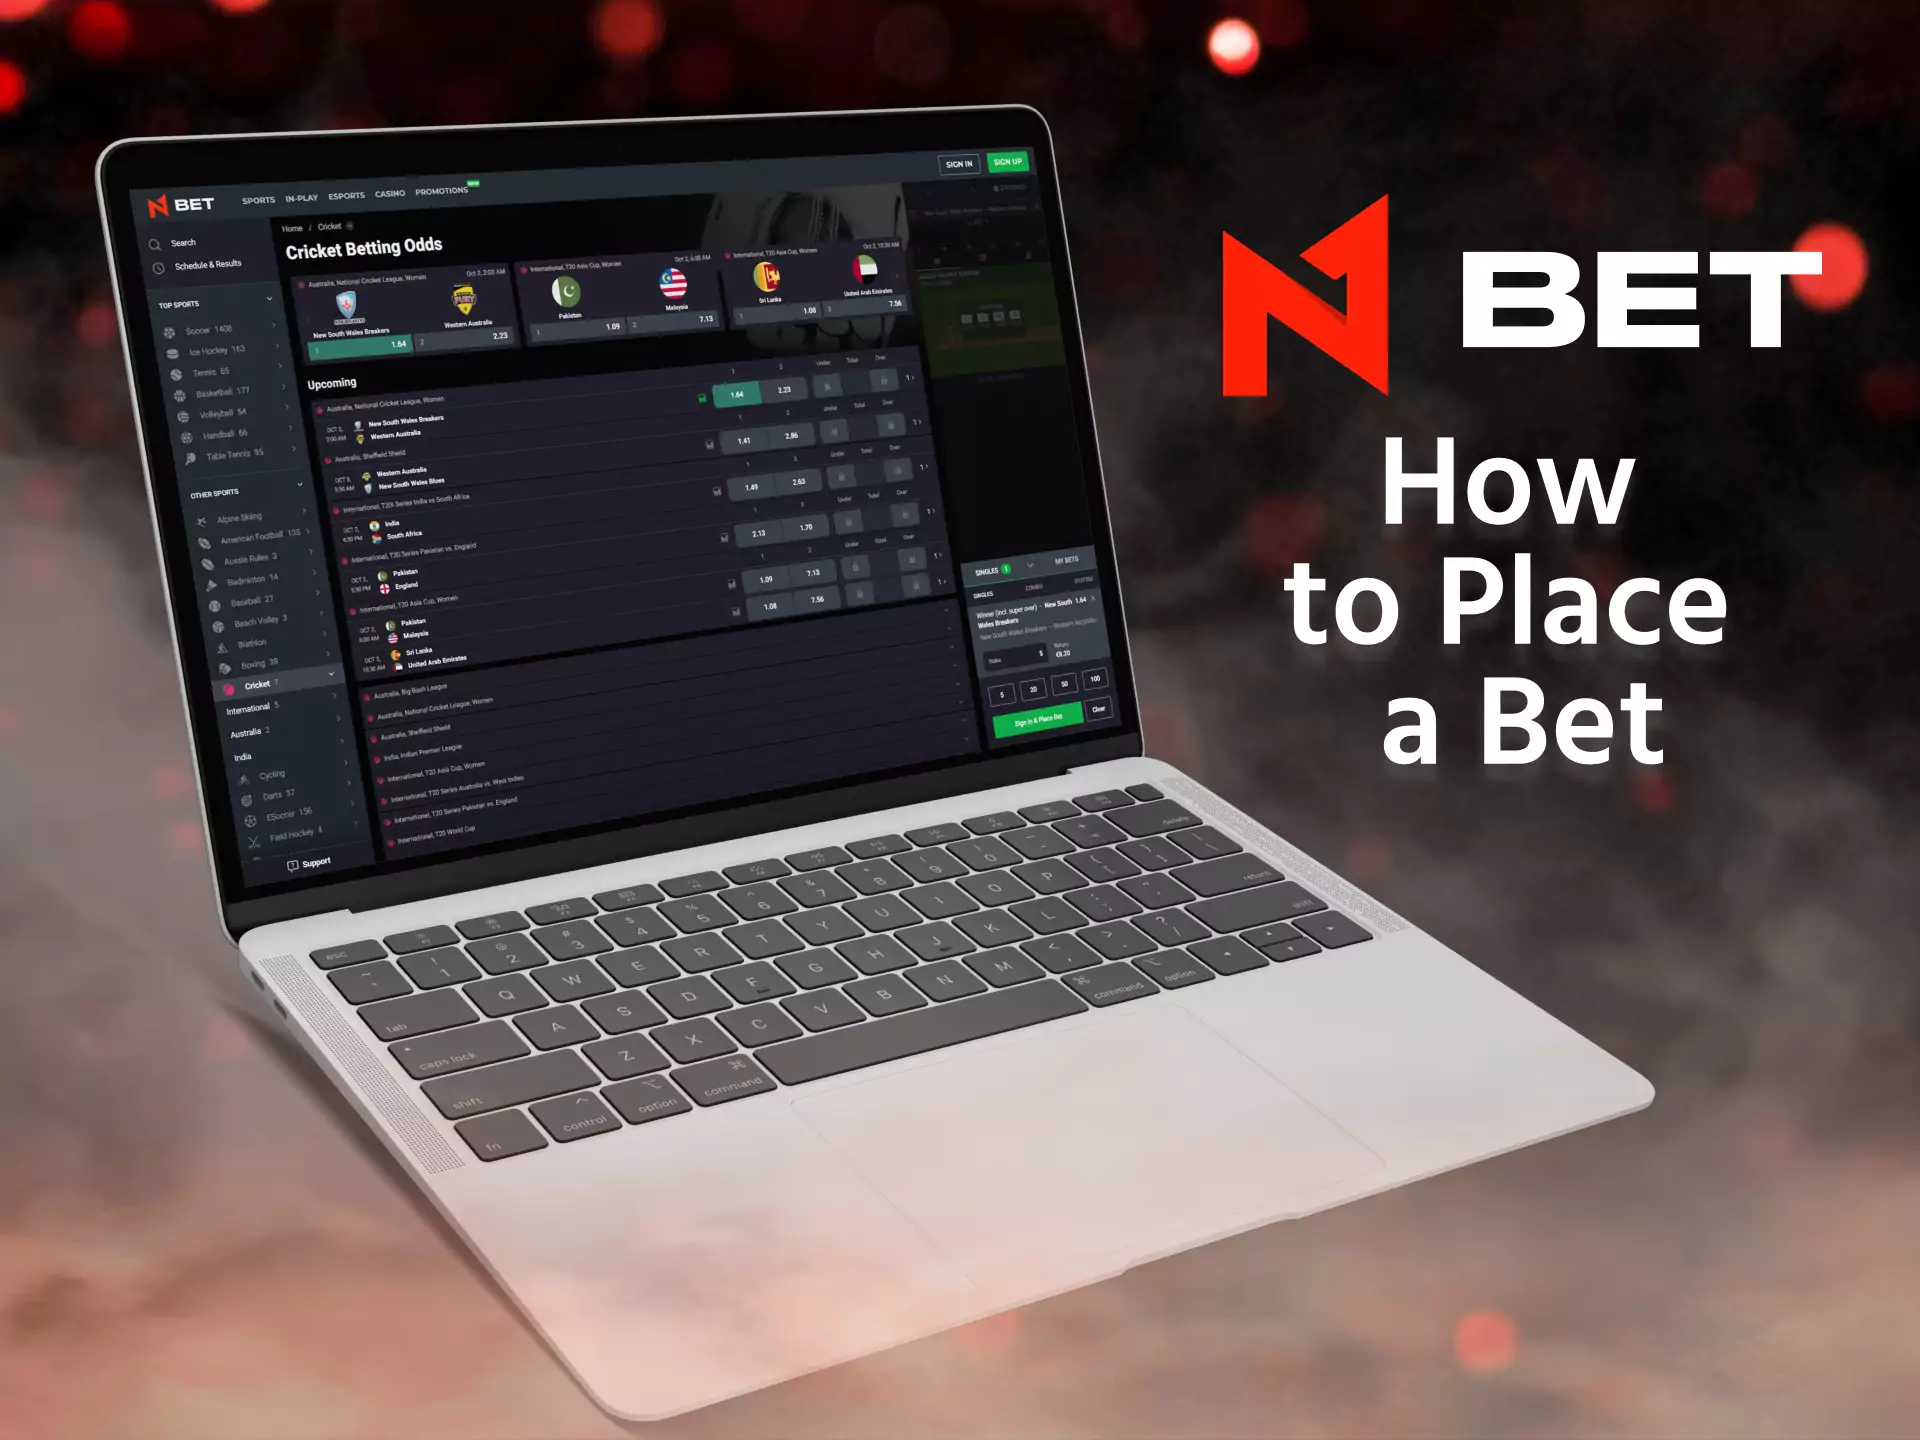 Use this instruction and place your bet in N1Bet.